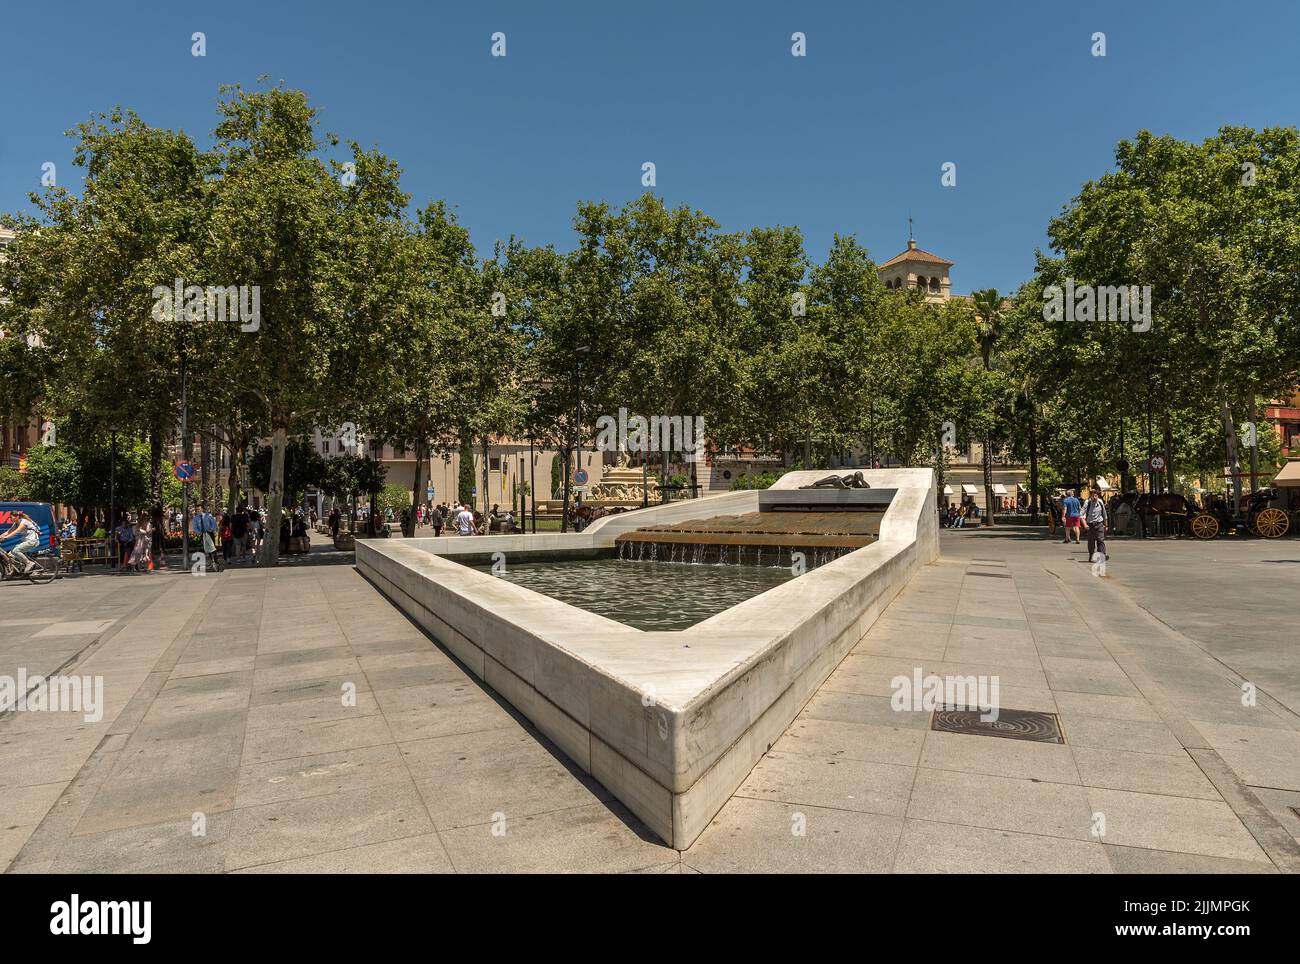 Monument to the Generation of Twenty seven, Seville, Spain Stock Photo